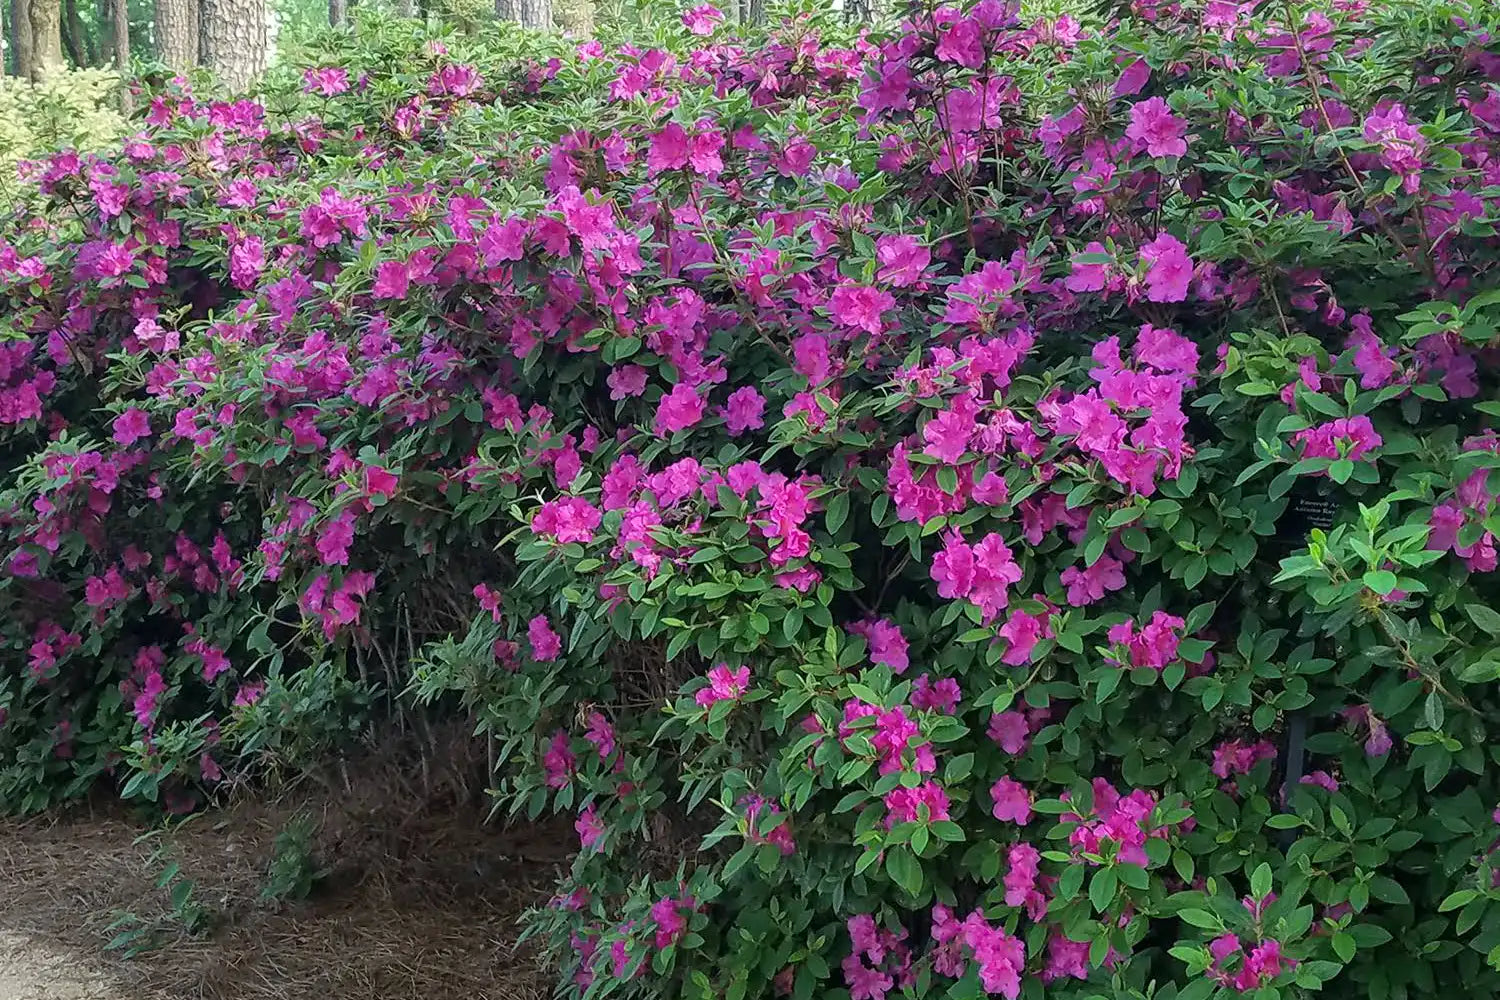 Densely filled, shrub with rich, purple trumpet shaped flowers of the Encore® Autumn Royalty™ Azalea is nestled among lush dark green foliage. Enlivens a garden spring, summer and fall.